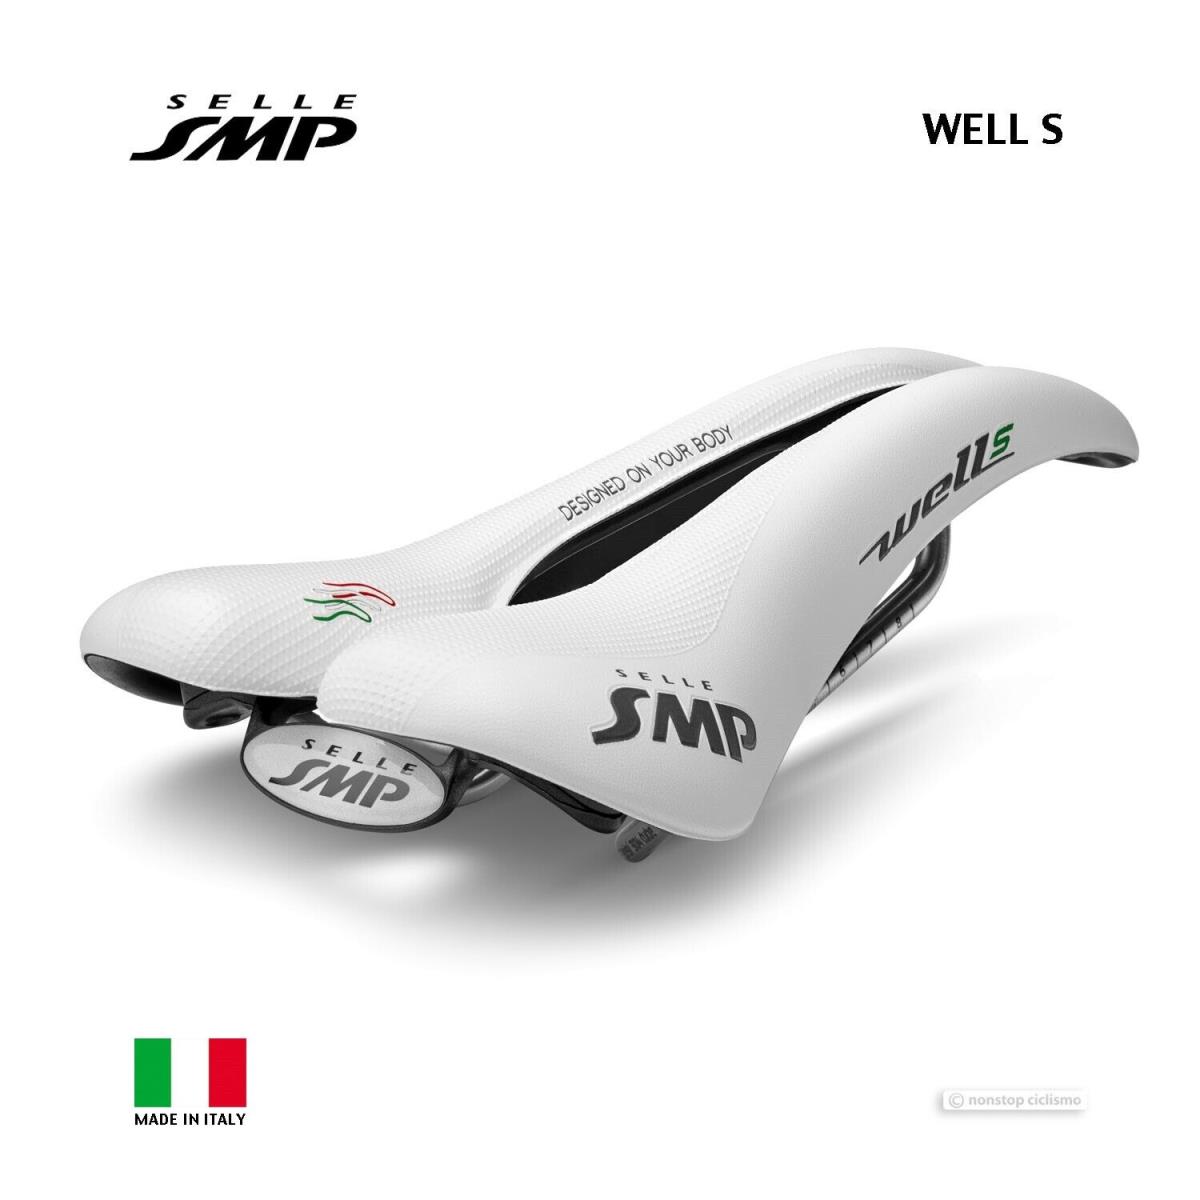 2023 Selle Smp Well S Saddle : White - Made IN Italy